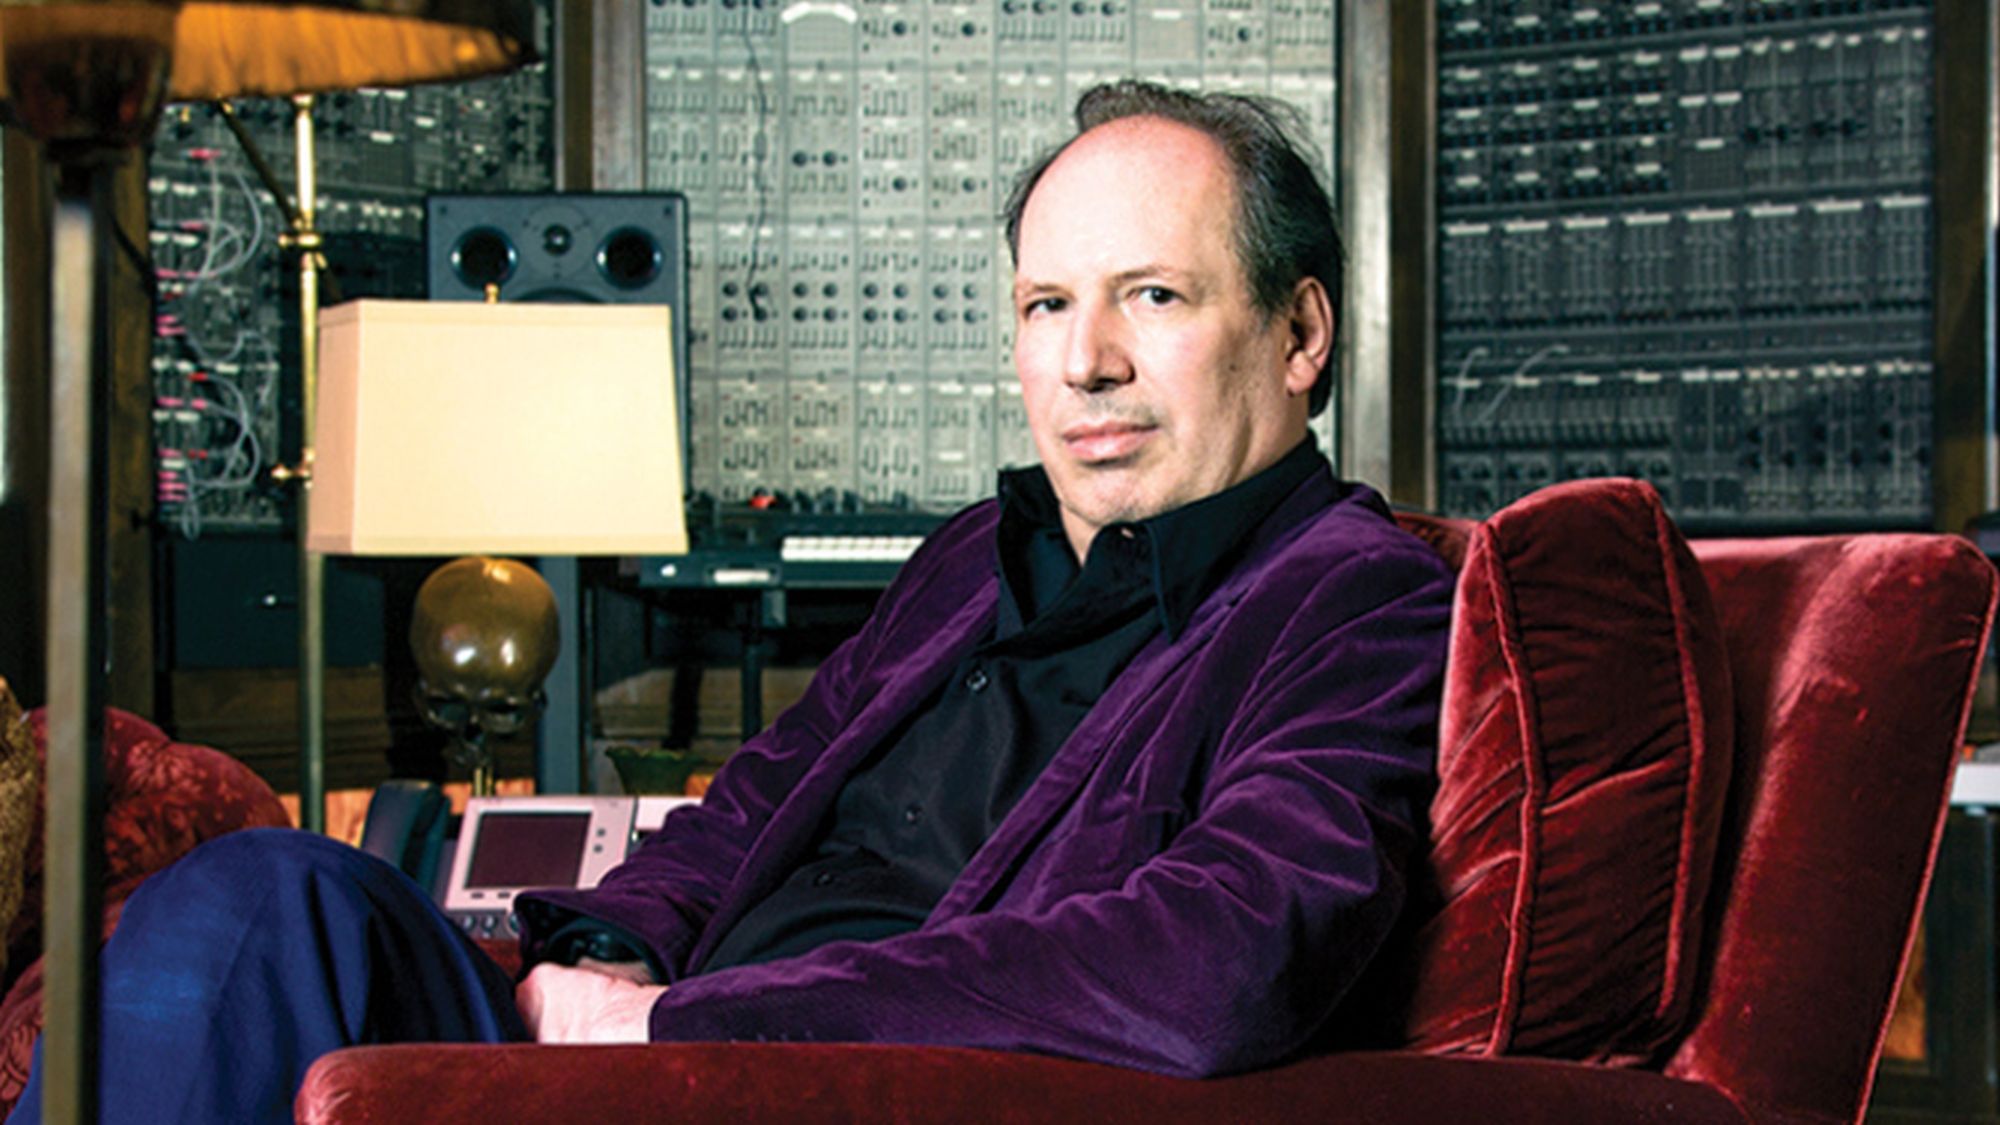 Hans Zimmer Wallpapers Images Photos Pictures Backgrounds2000 x 1125